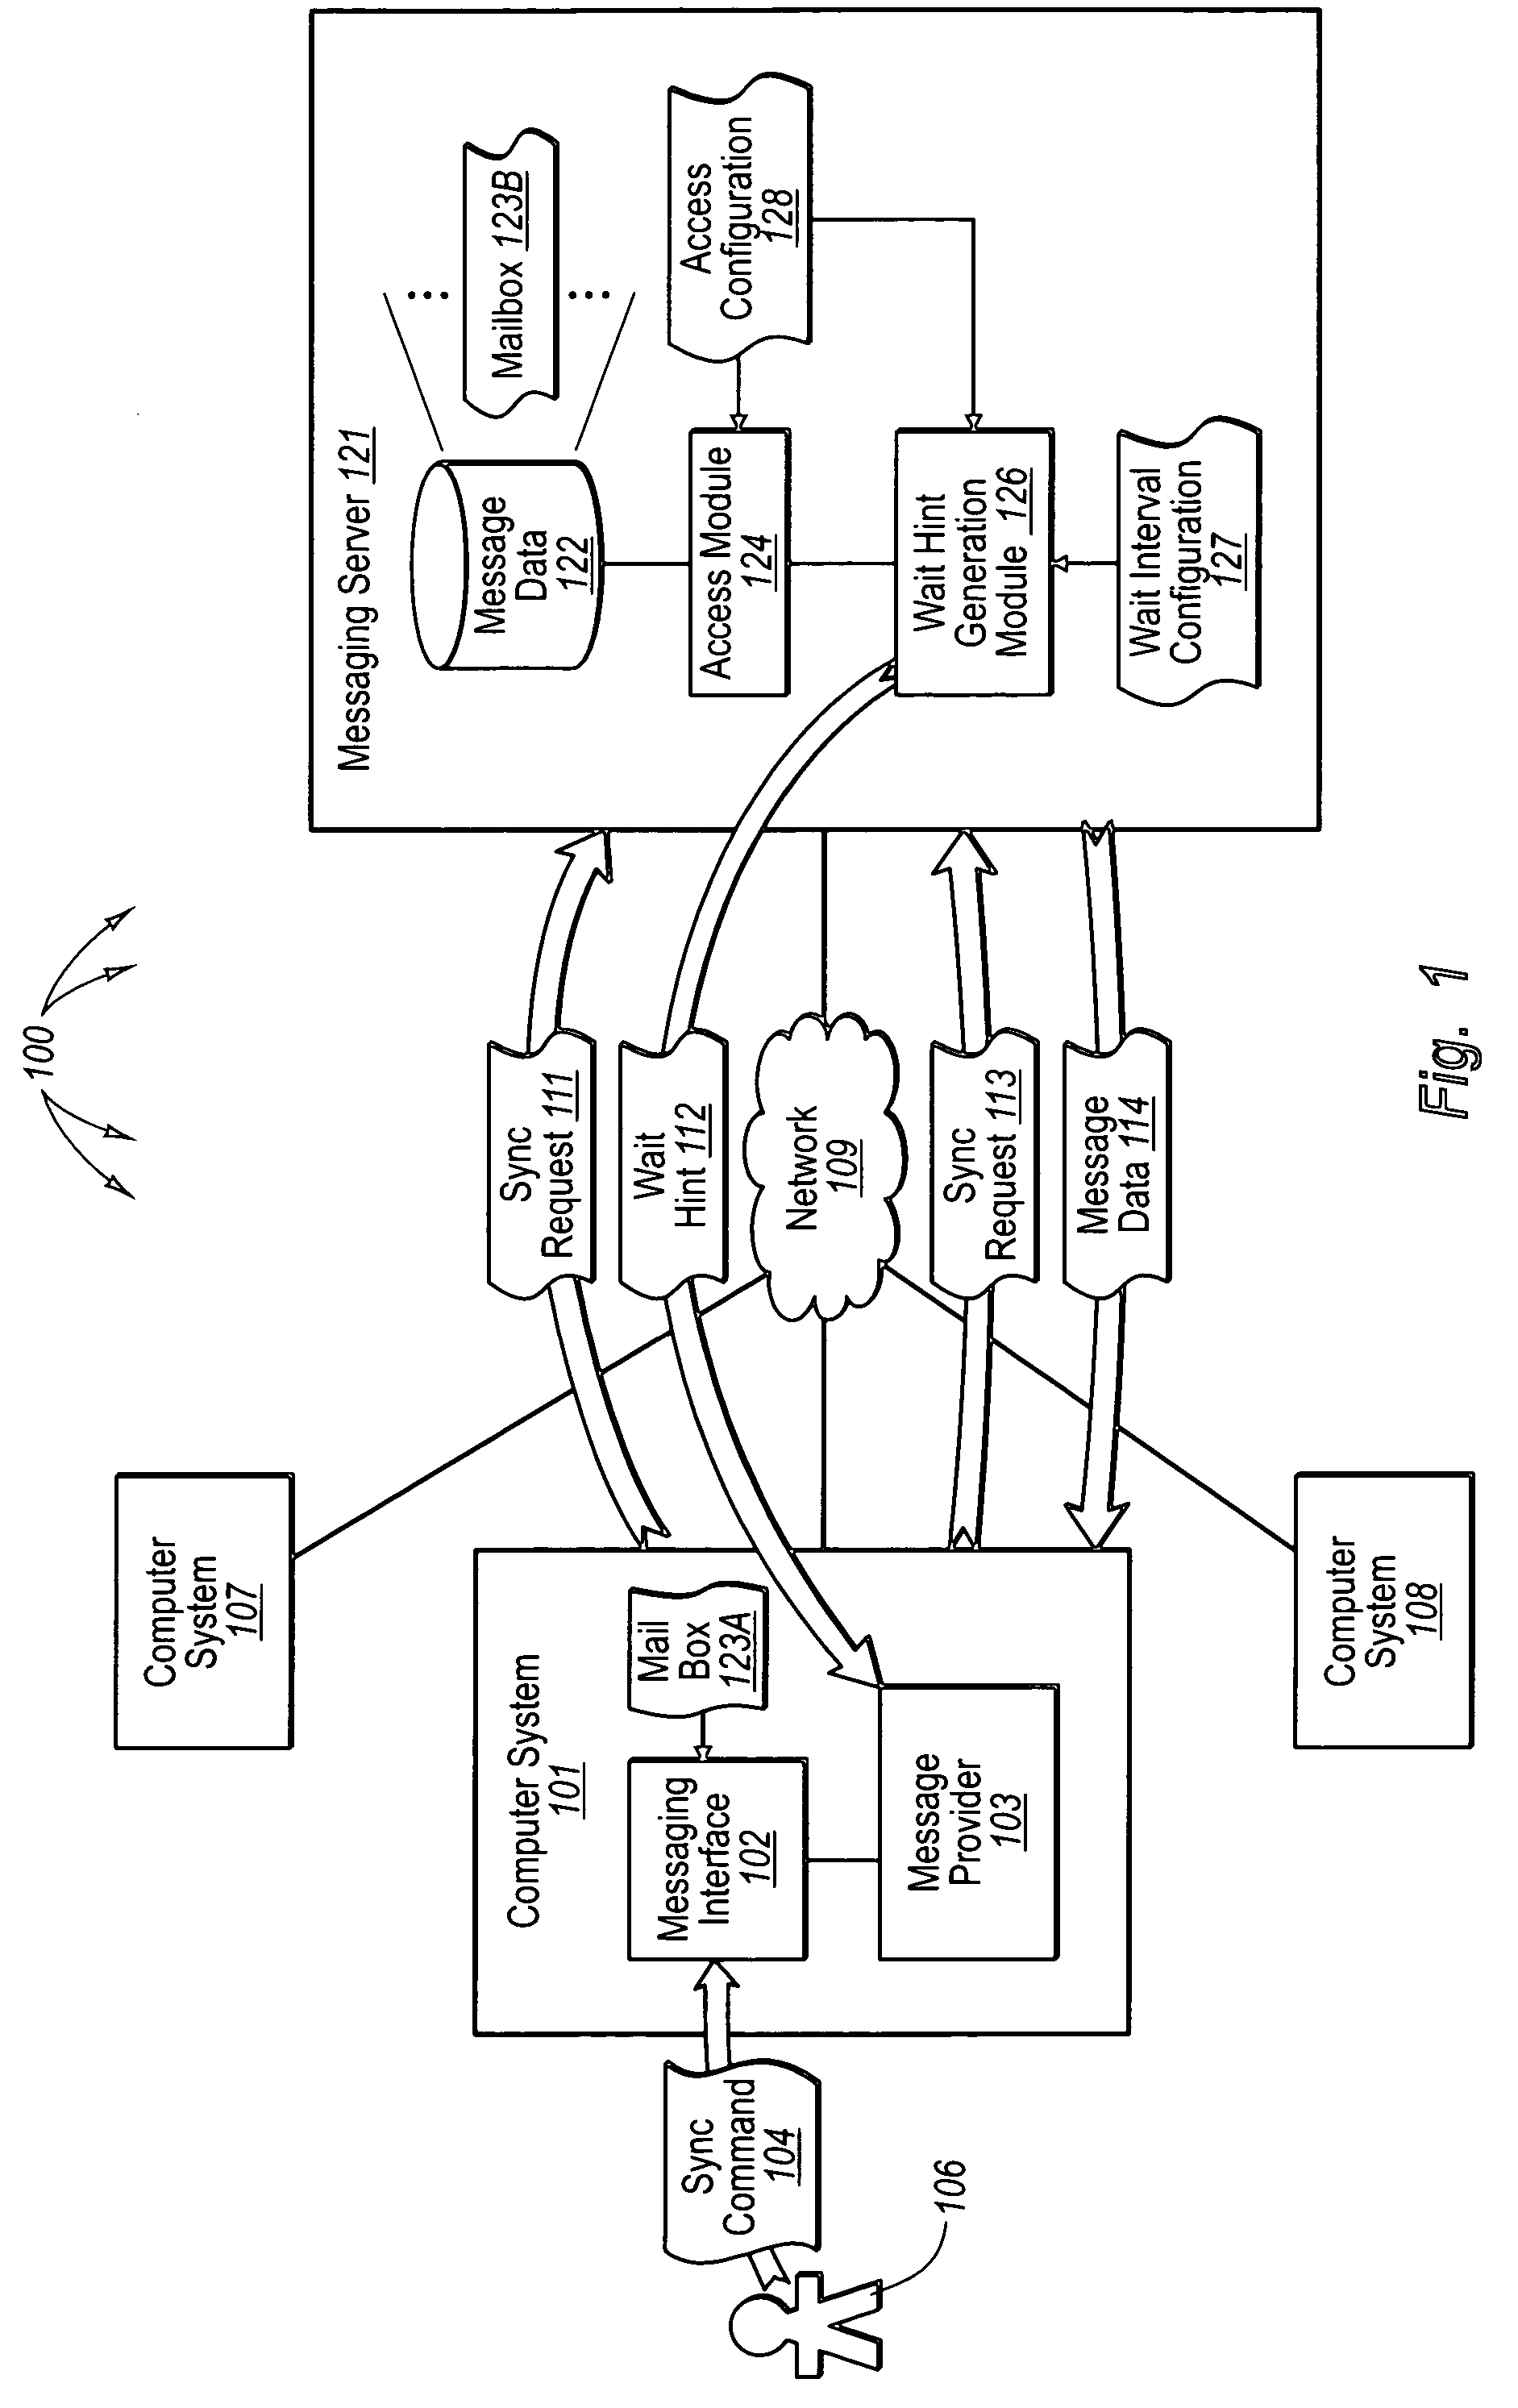 Regulating client requests in an electronic messaging environment